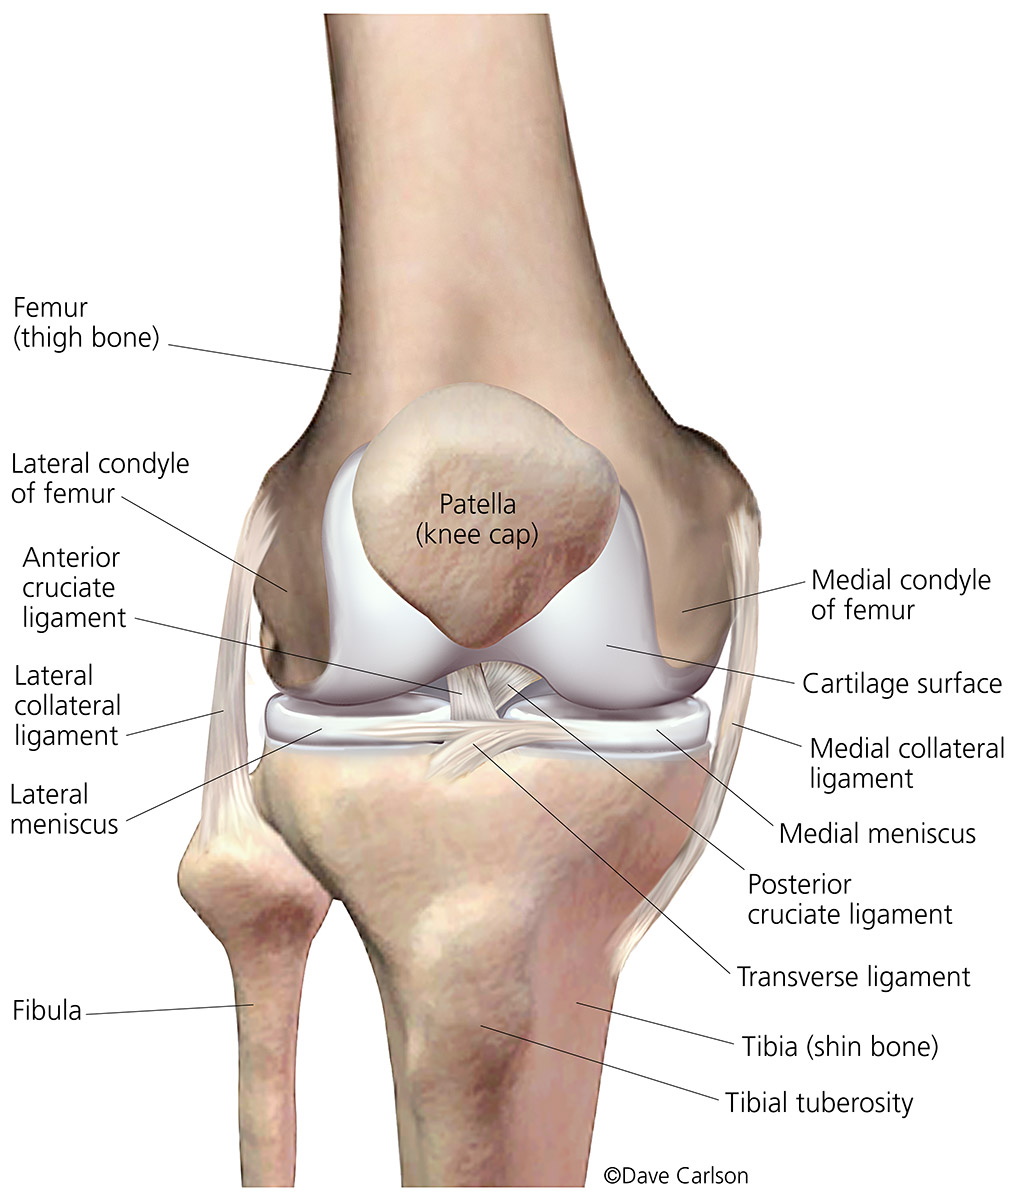 Illustration of the bones, ligaments, cartilage and menisci of the human right knee (front view)